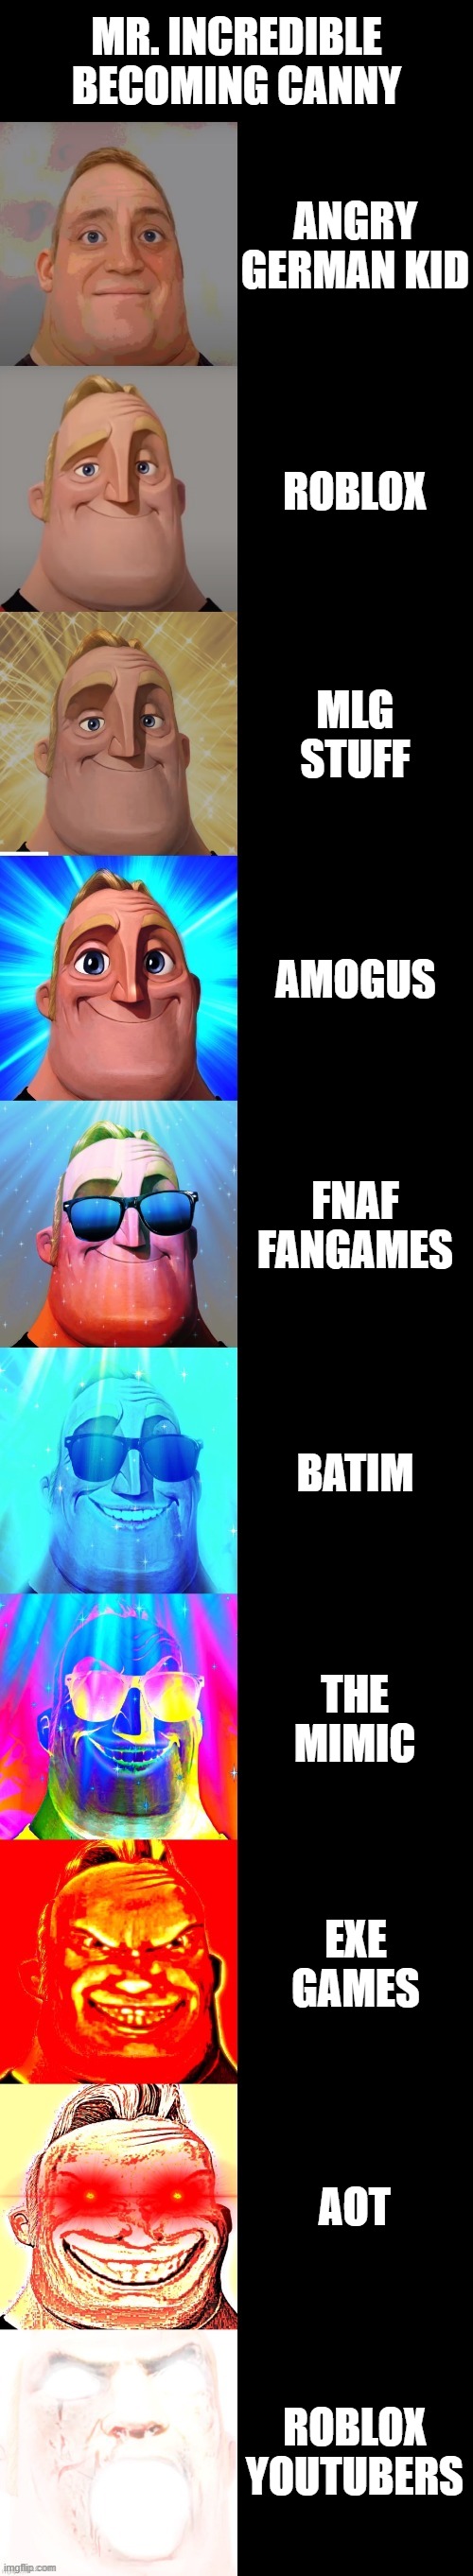 mr incredible becoming canny | MR. INCREDIBLE BECOMING CANNY; ANGRY GERMAN KID; ROBLOX; MLG STUFF; AMOGUS; FNAF FANGAMES; BATIM; THE MIMIC; EXE GAMES; AOT; ROBLOX YOUTUBERS | image tagged in mr incredible becoming canny | made w/ Imgflip meme maker